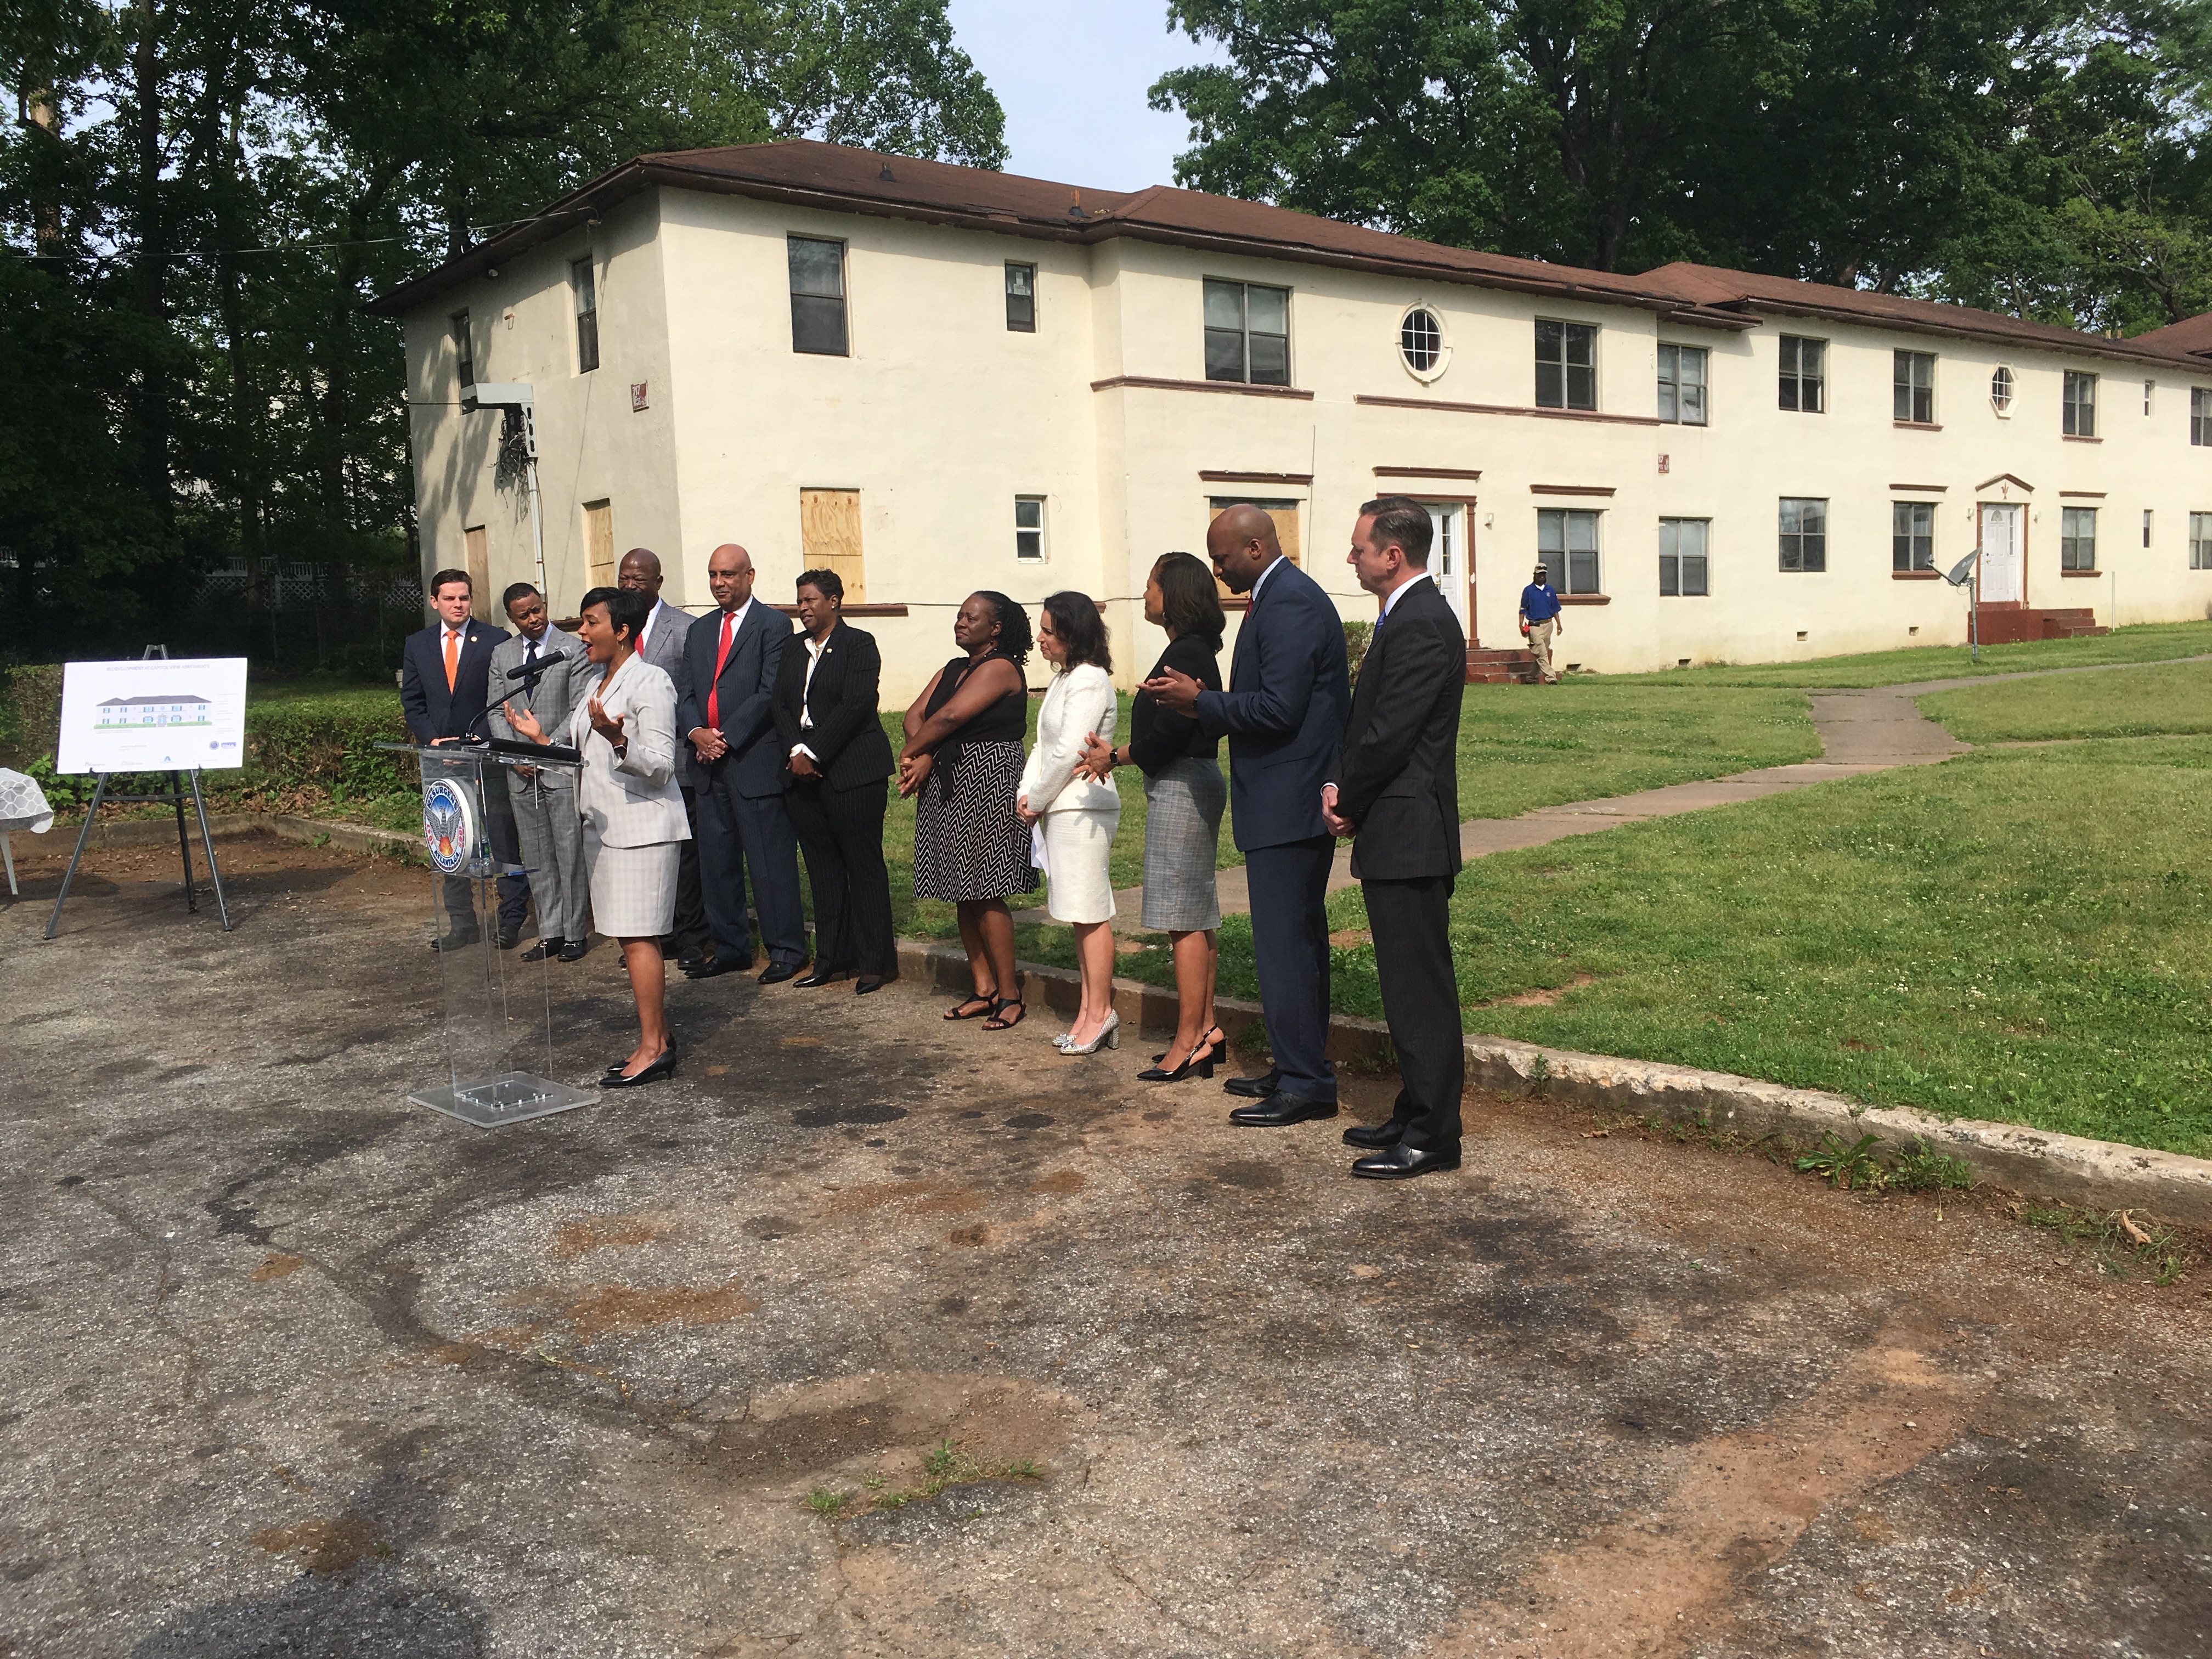 Atlanta Mayor Keisha Lance Bottoms (at podium) and other city leaders at a press conference at Capitol View apartments in Adair Park on April 25, 2019. Credit: Maggie Lee